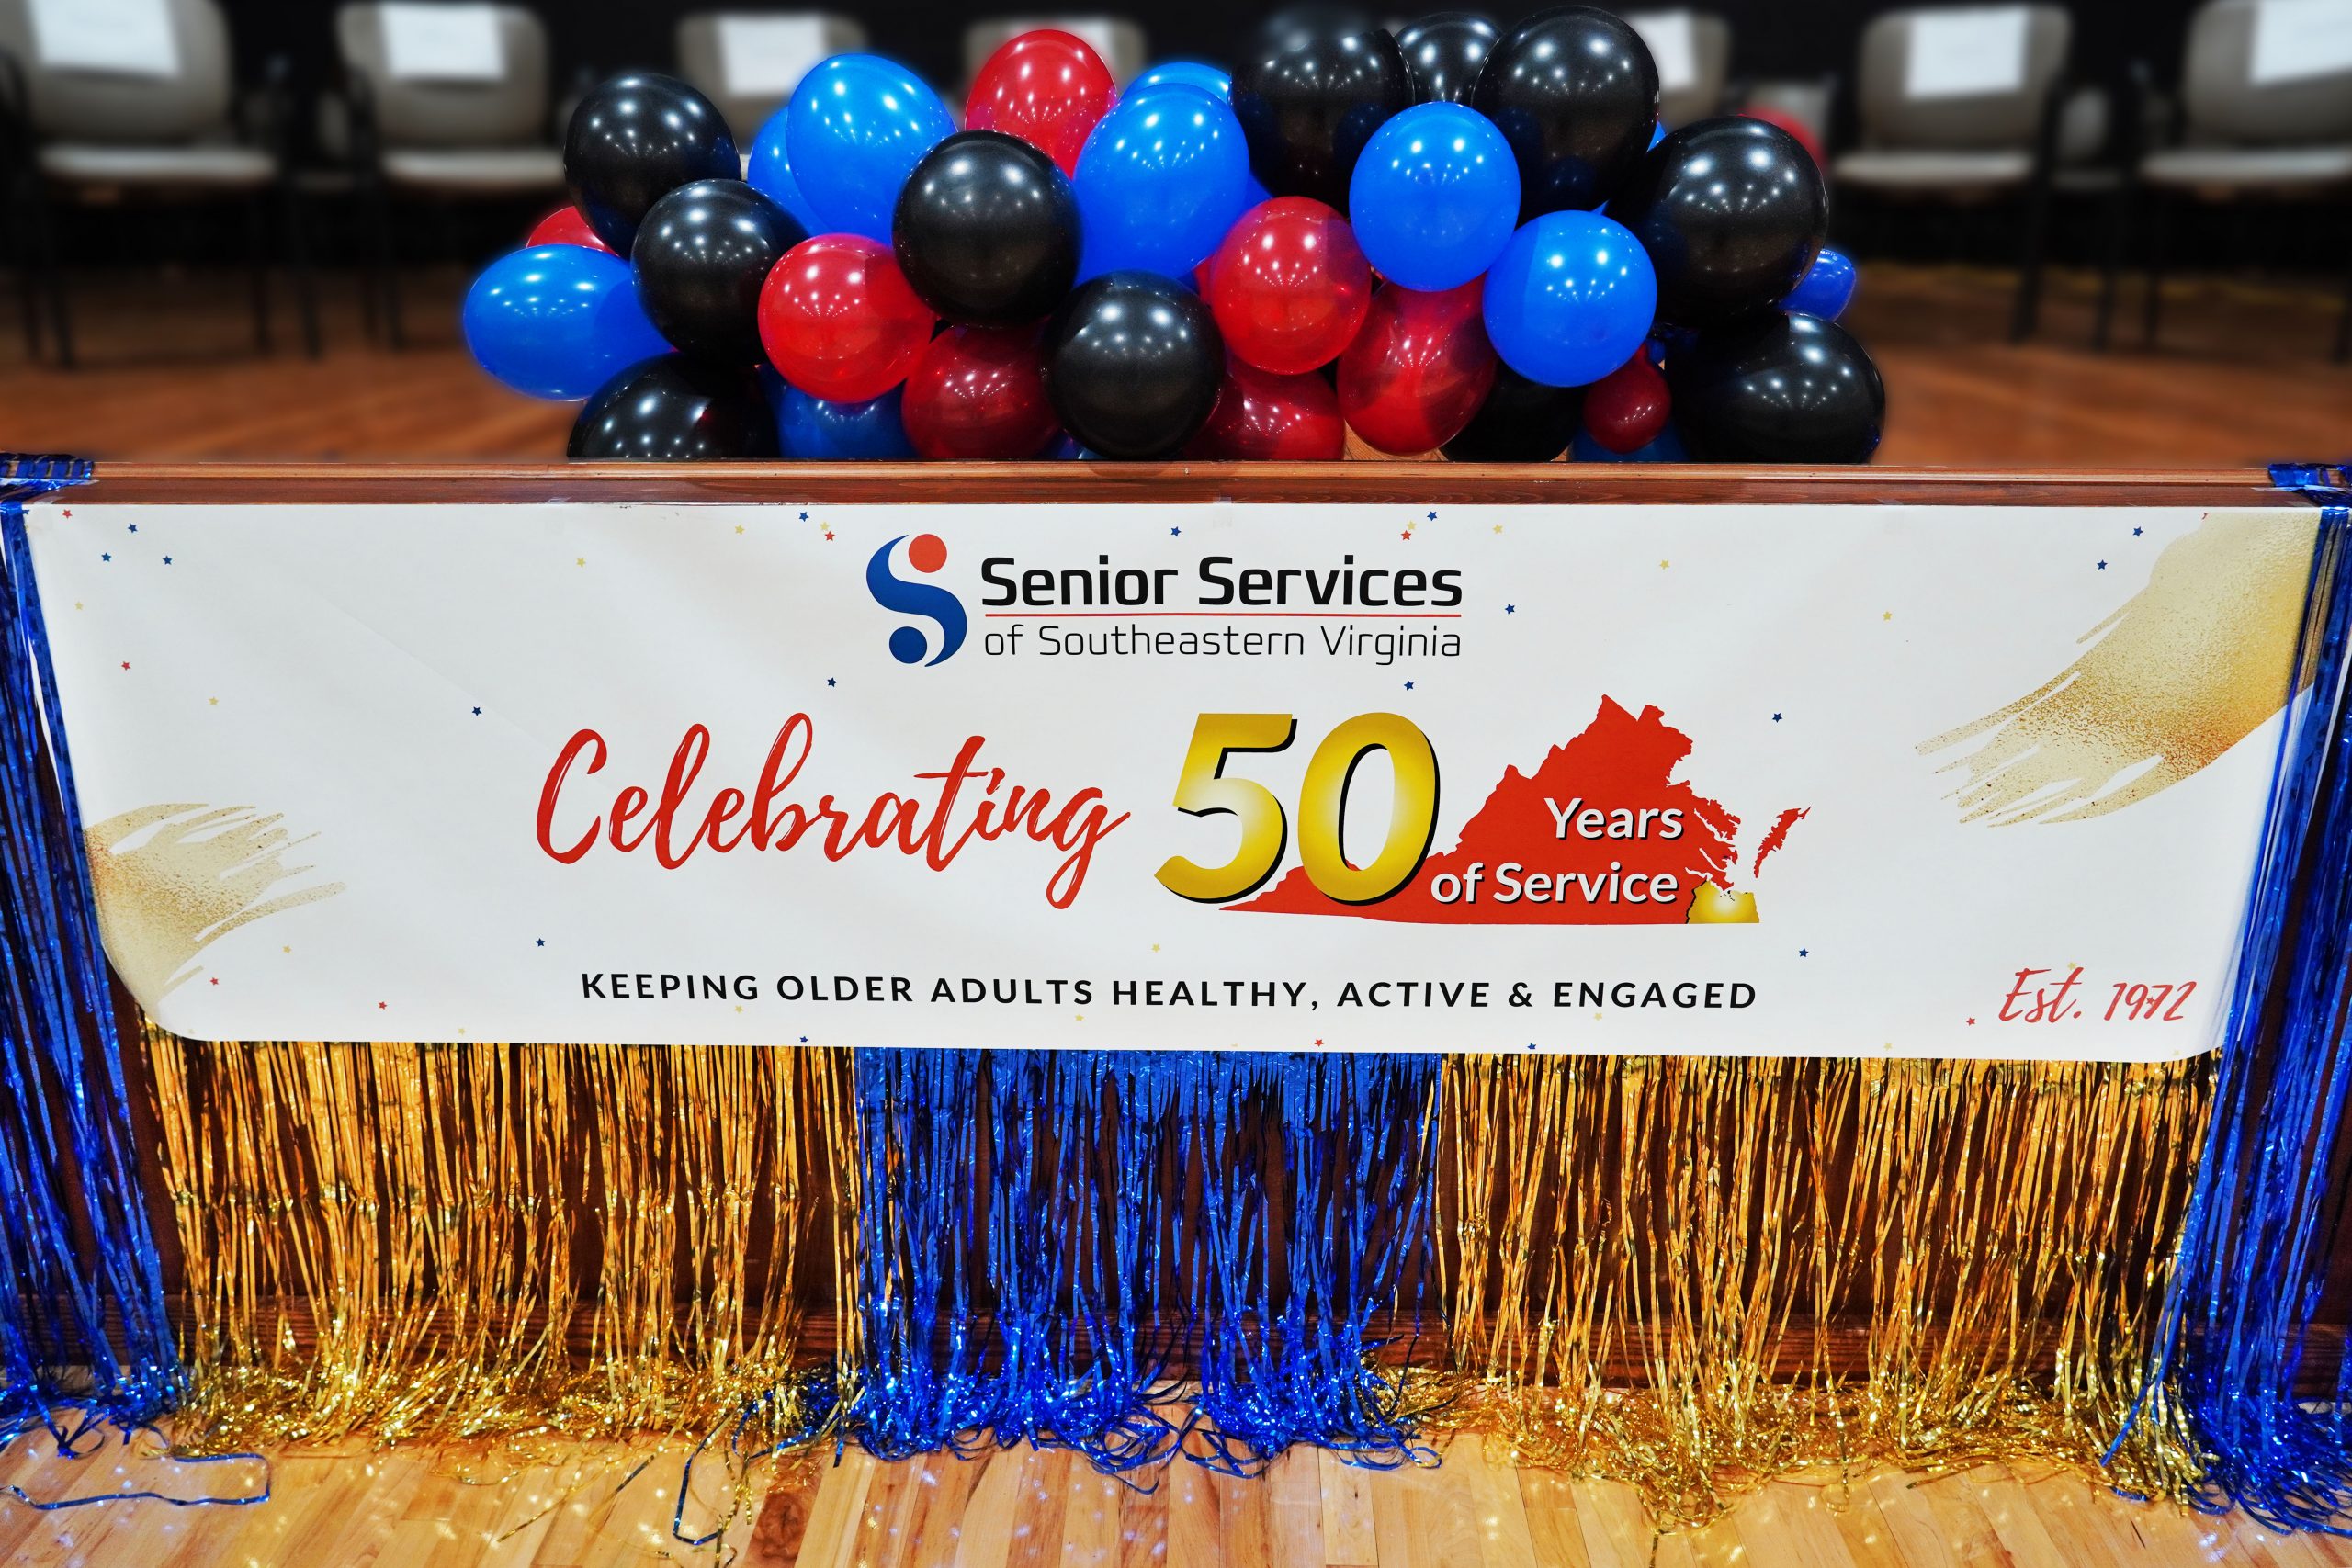 Celebrating 50 Years of Service in 2022